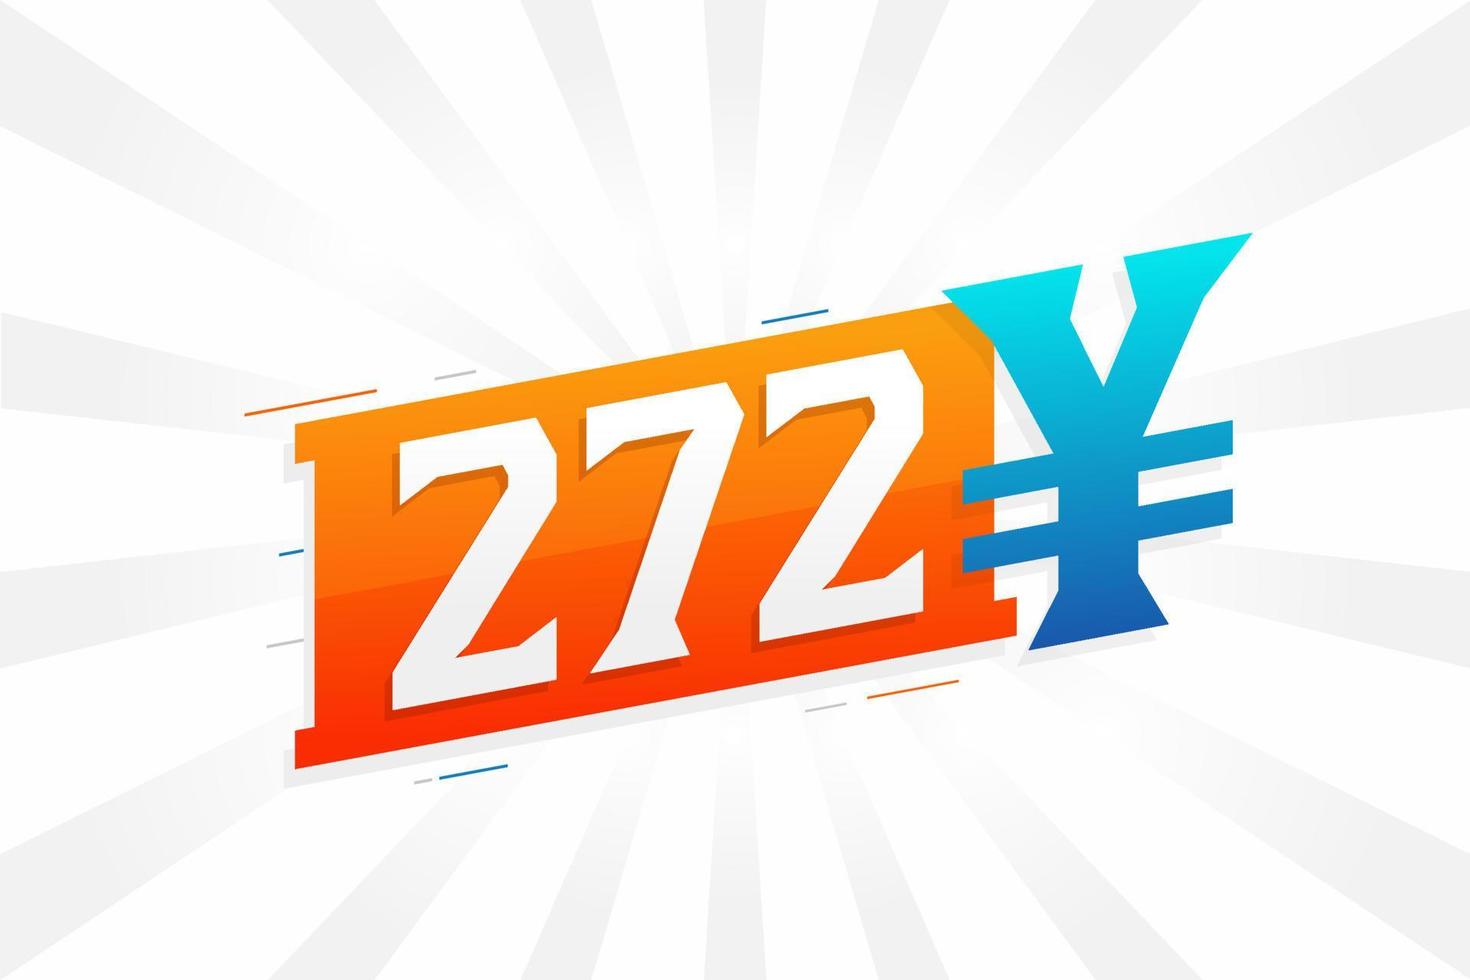 272 Yuan Chinese currency vector text symbol. 272 Yen Japanese currency Money stock vector